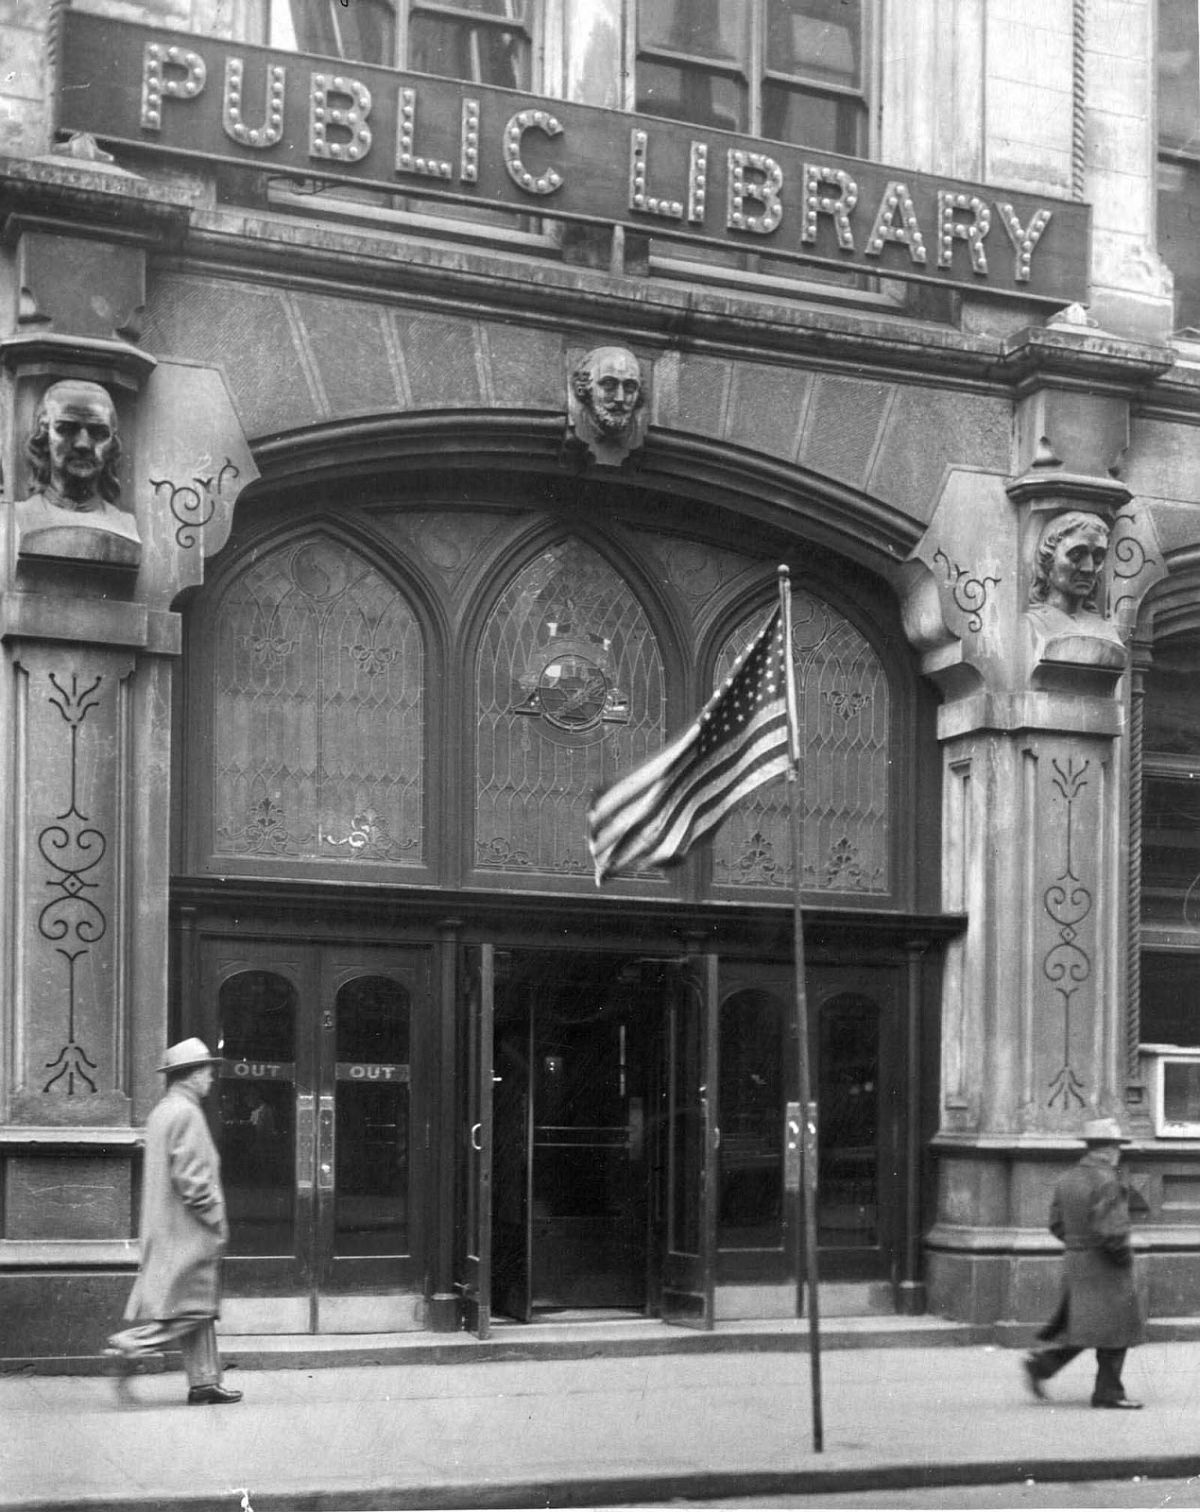 The library’s main entrance.